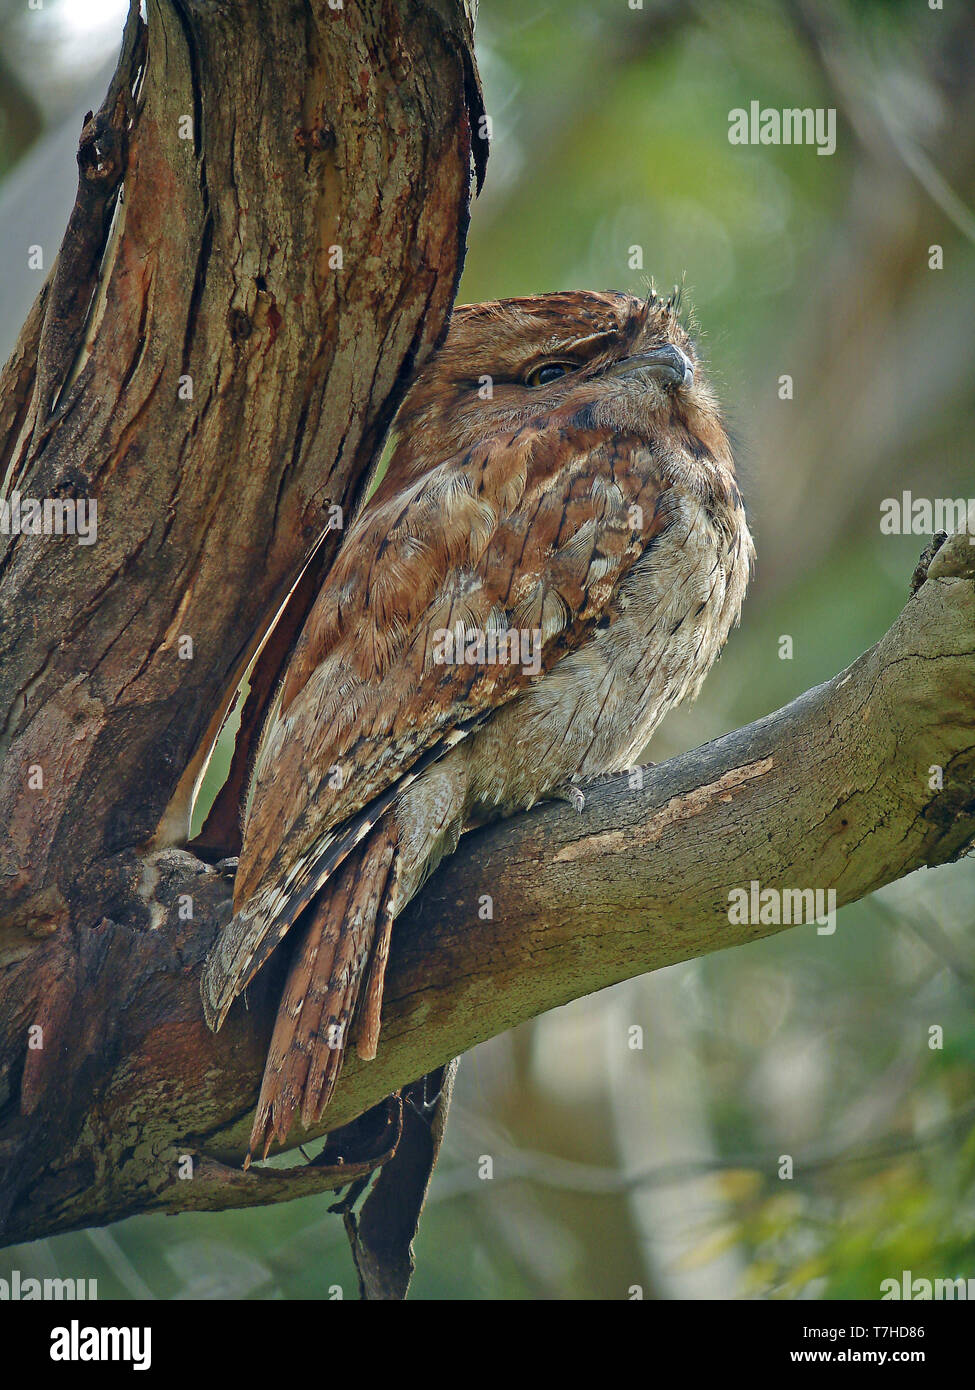 Tawny frogmouth (Podargus strigoides) during daylight perched in tree in Australia. Stock Photo